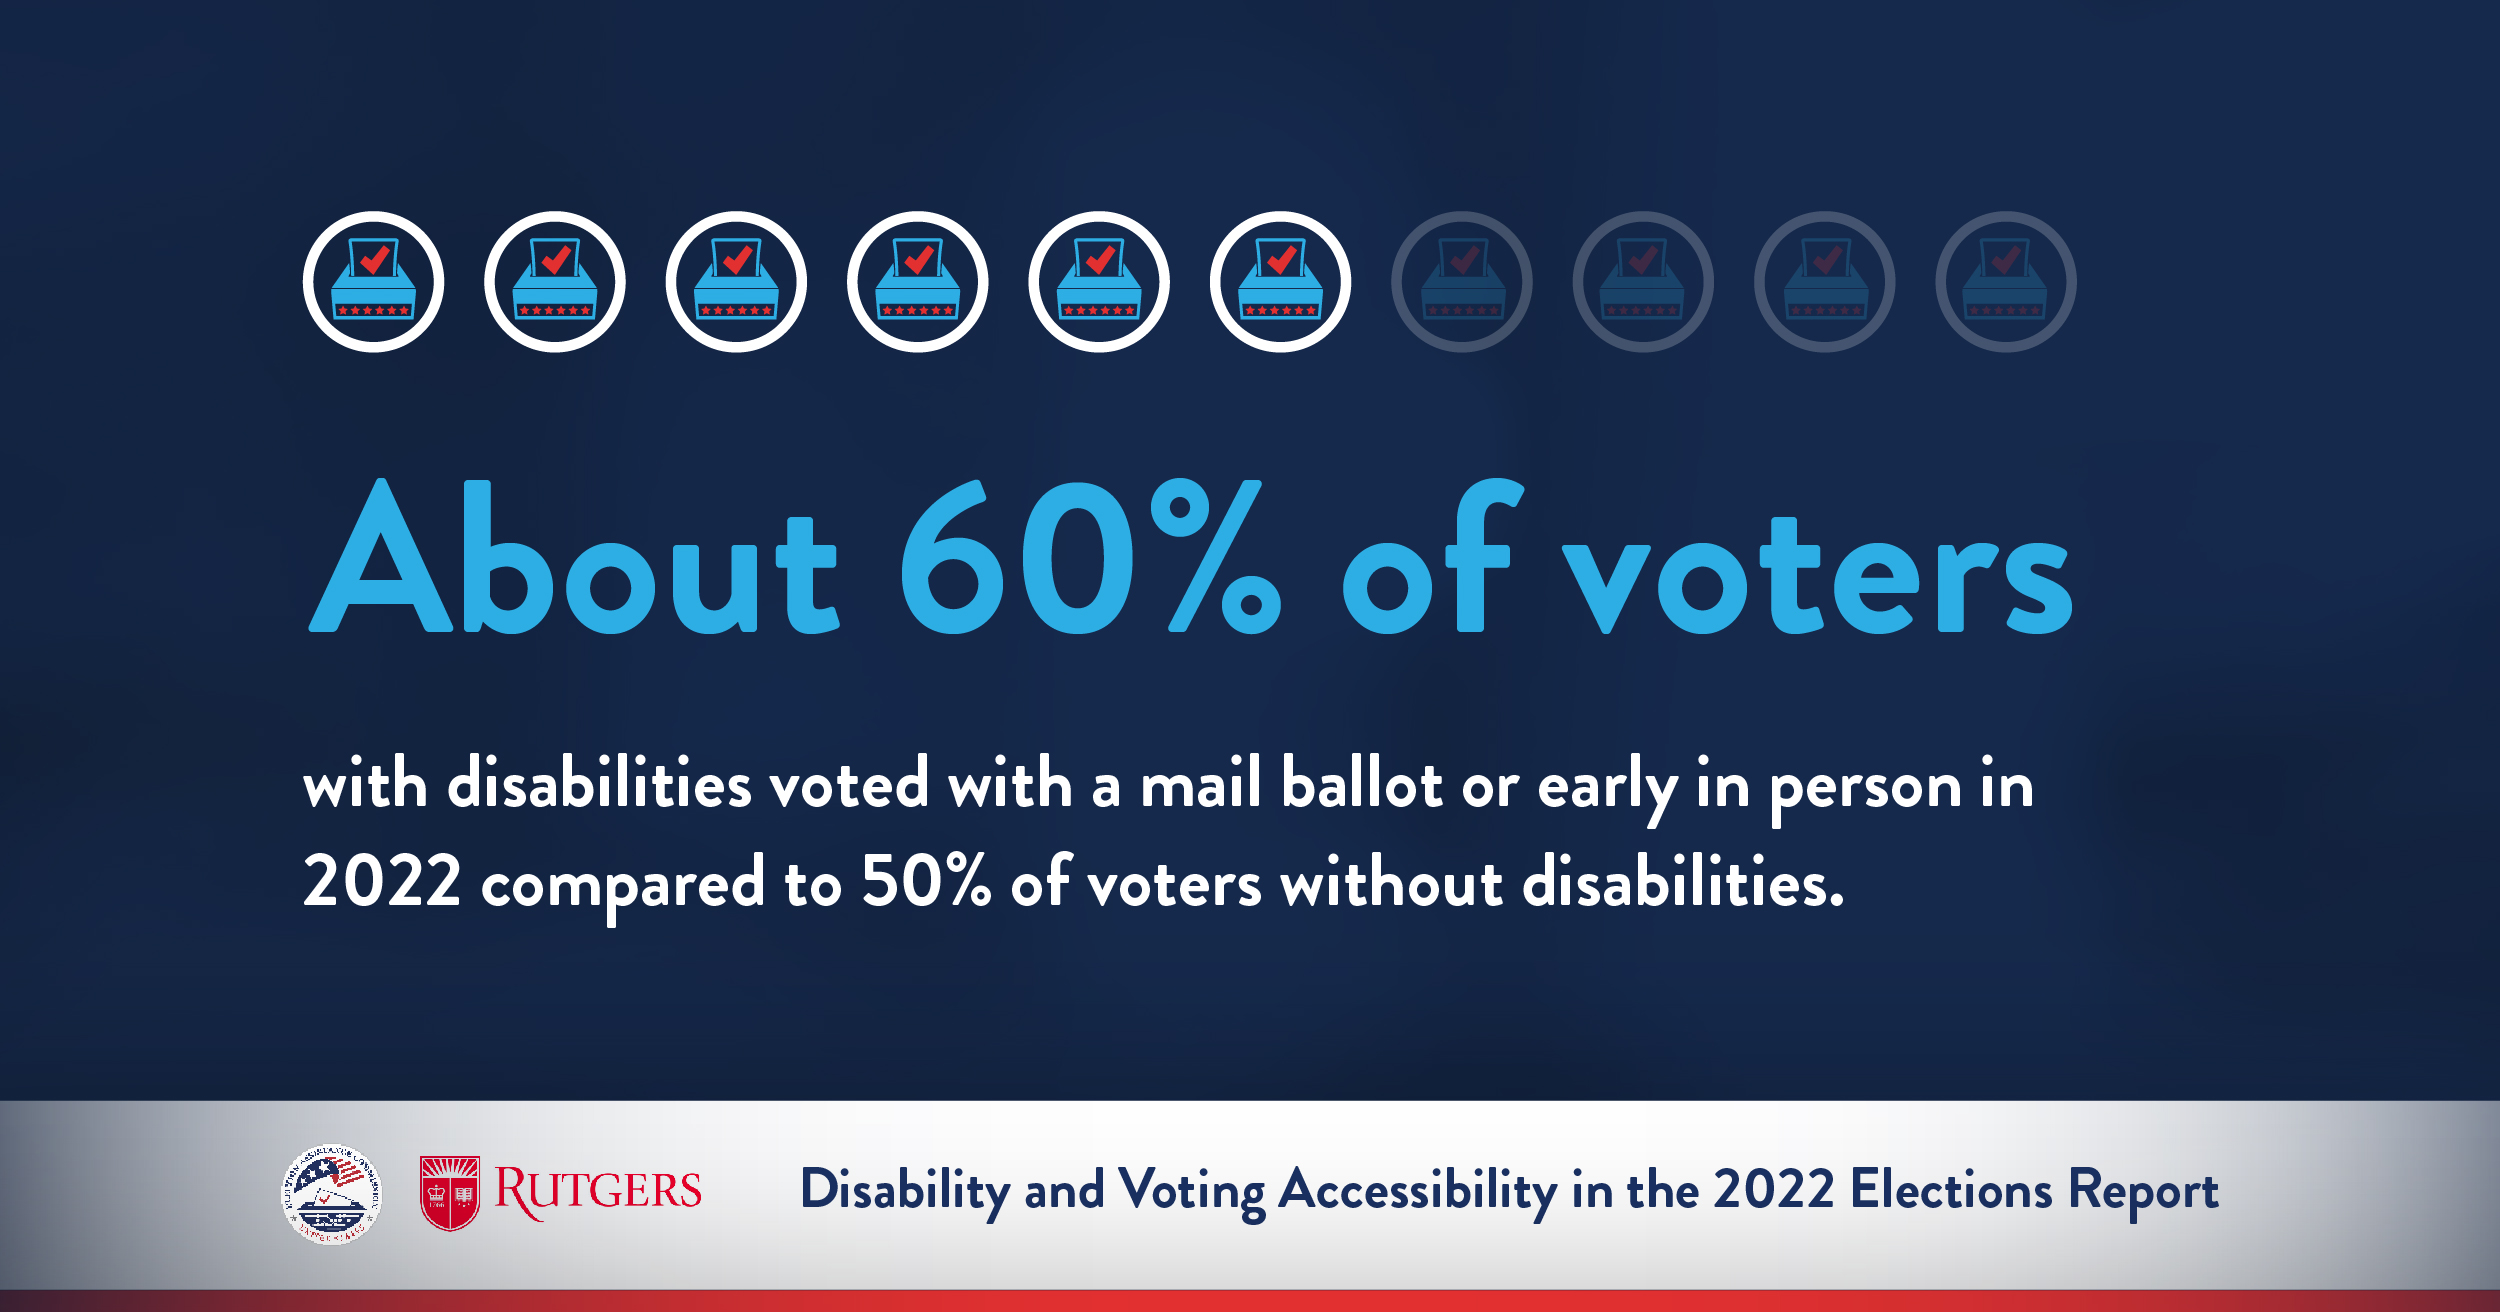 Rutger's Report graphic- "About 60% of voters of disabilities voted with a mail ballot or early in person in 2022 compared to 50% of voters without disabilities."